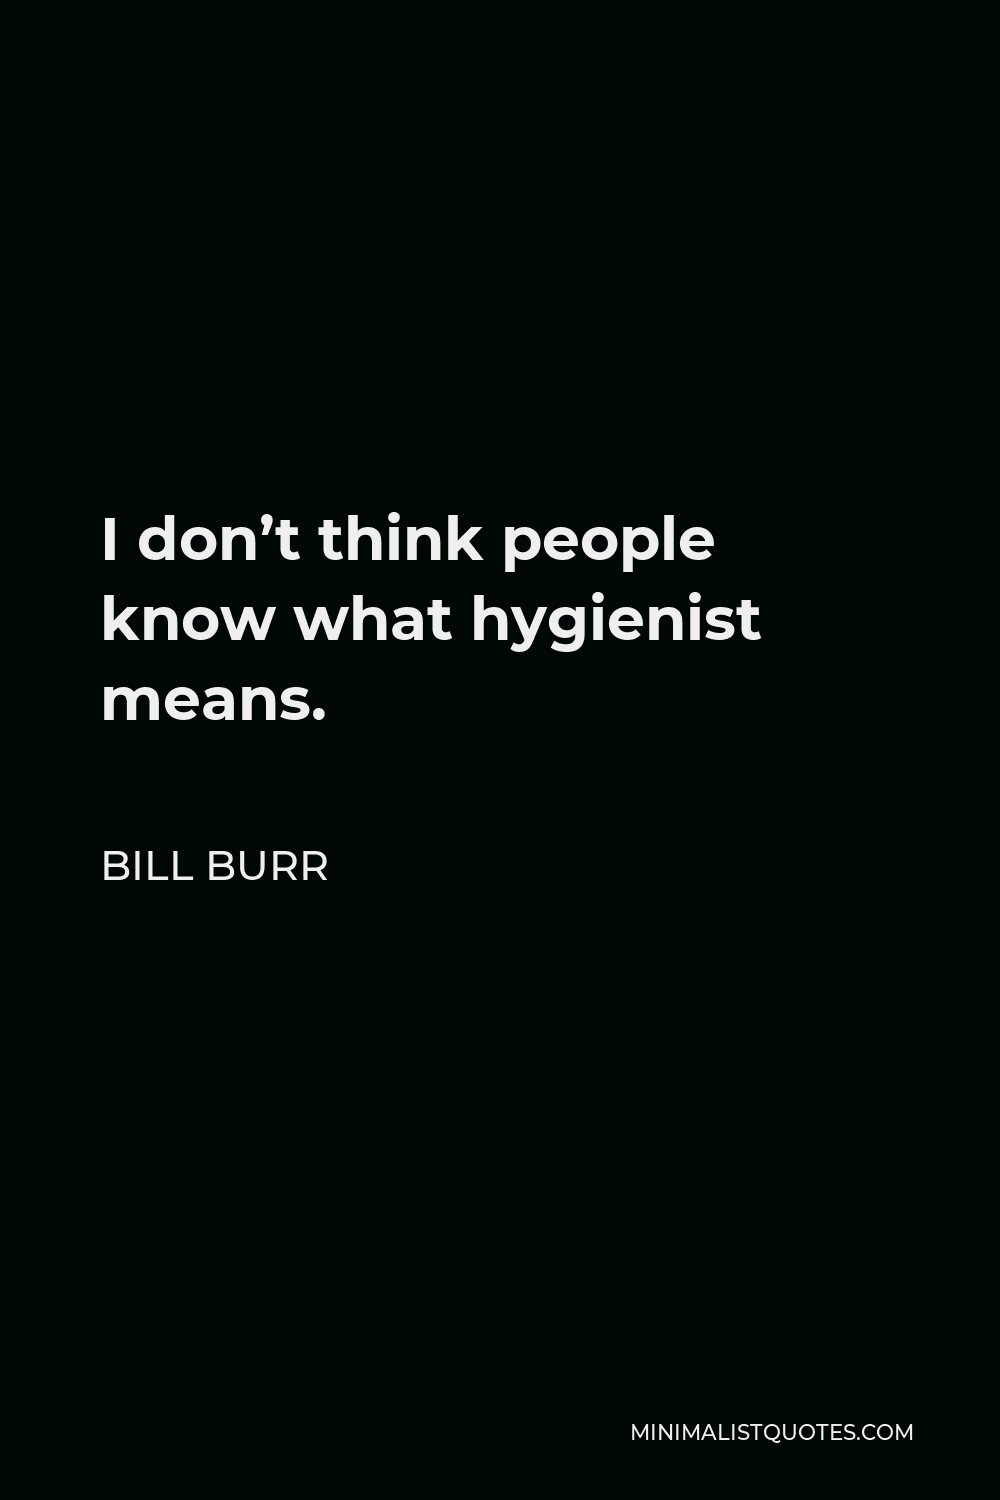 Bill Burr Quote - I don’t think people know what hygienist means.